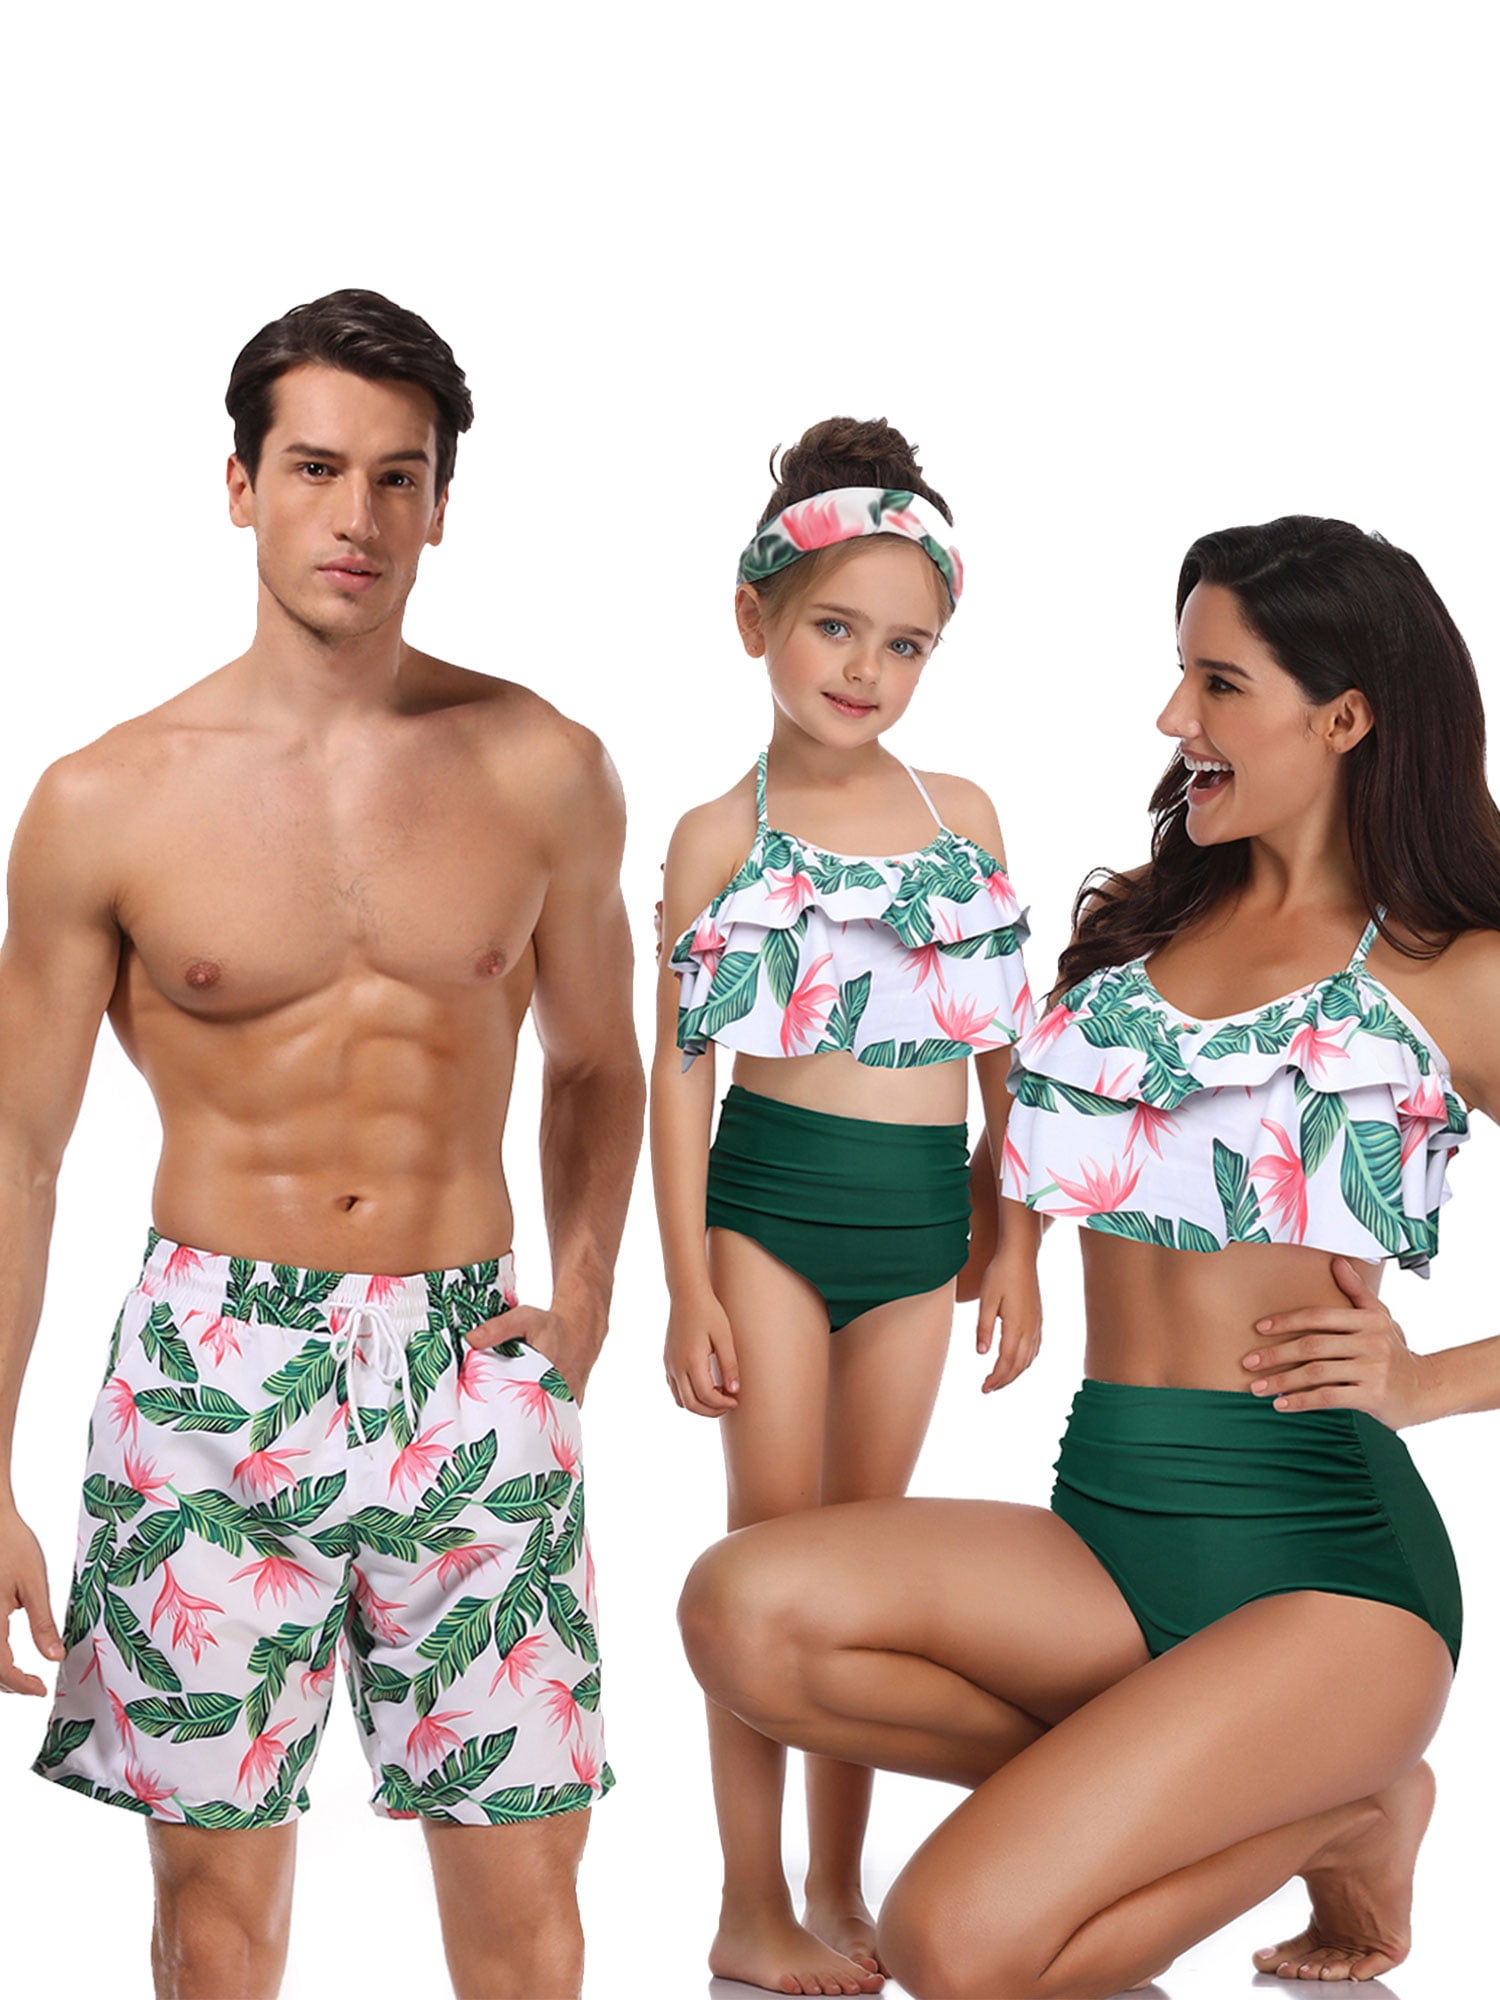 Family Matching Leaves Print Swimwear Mommy Daddy and Me Swimsuit Parent-Child Bikini Trunks Set Bathing Suit